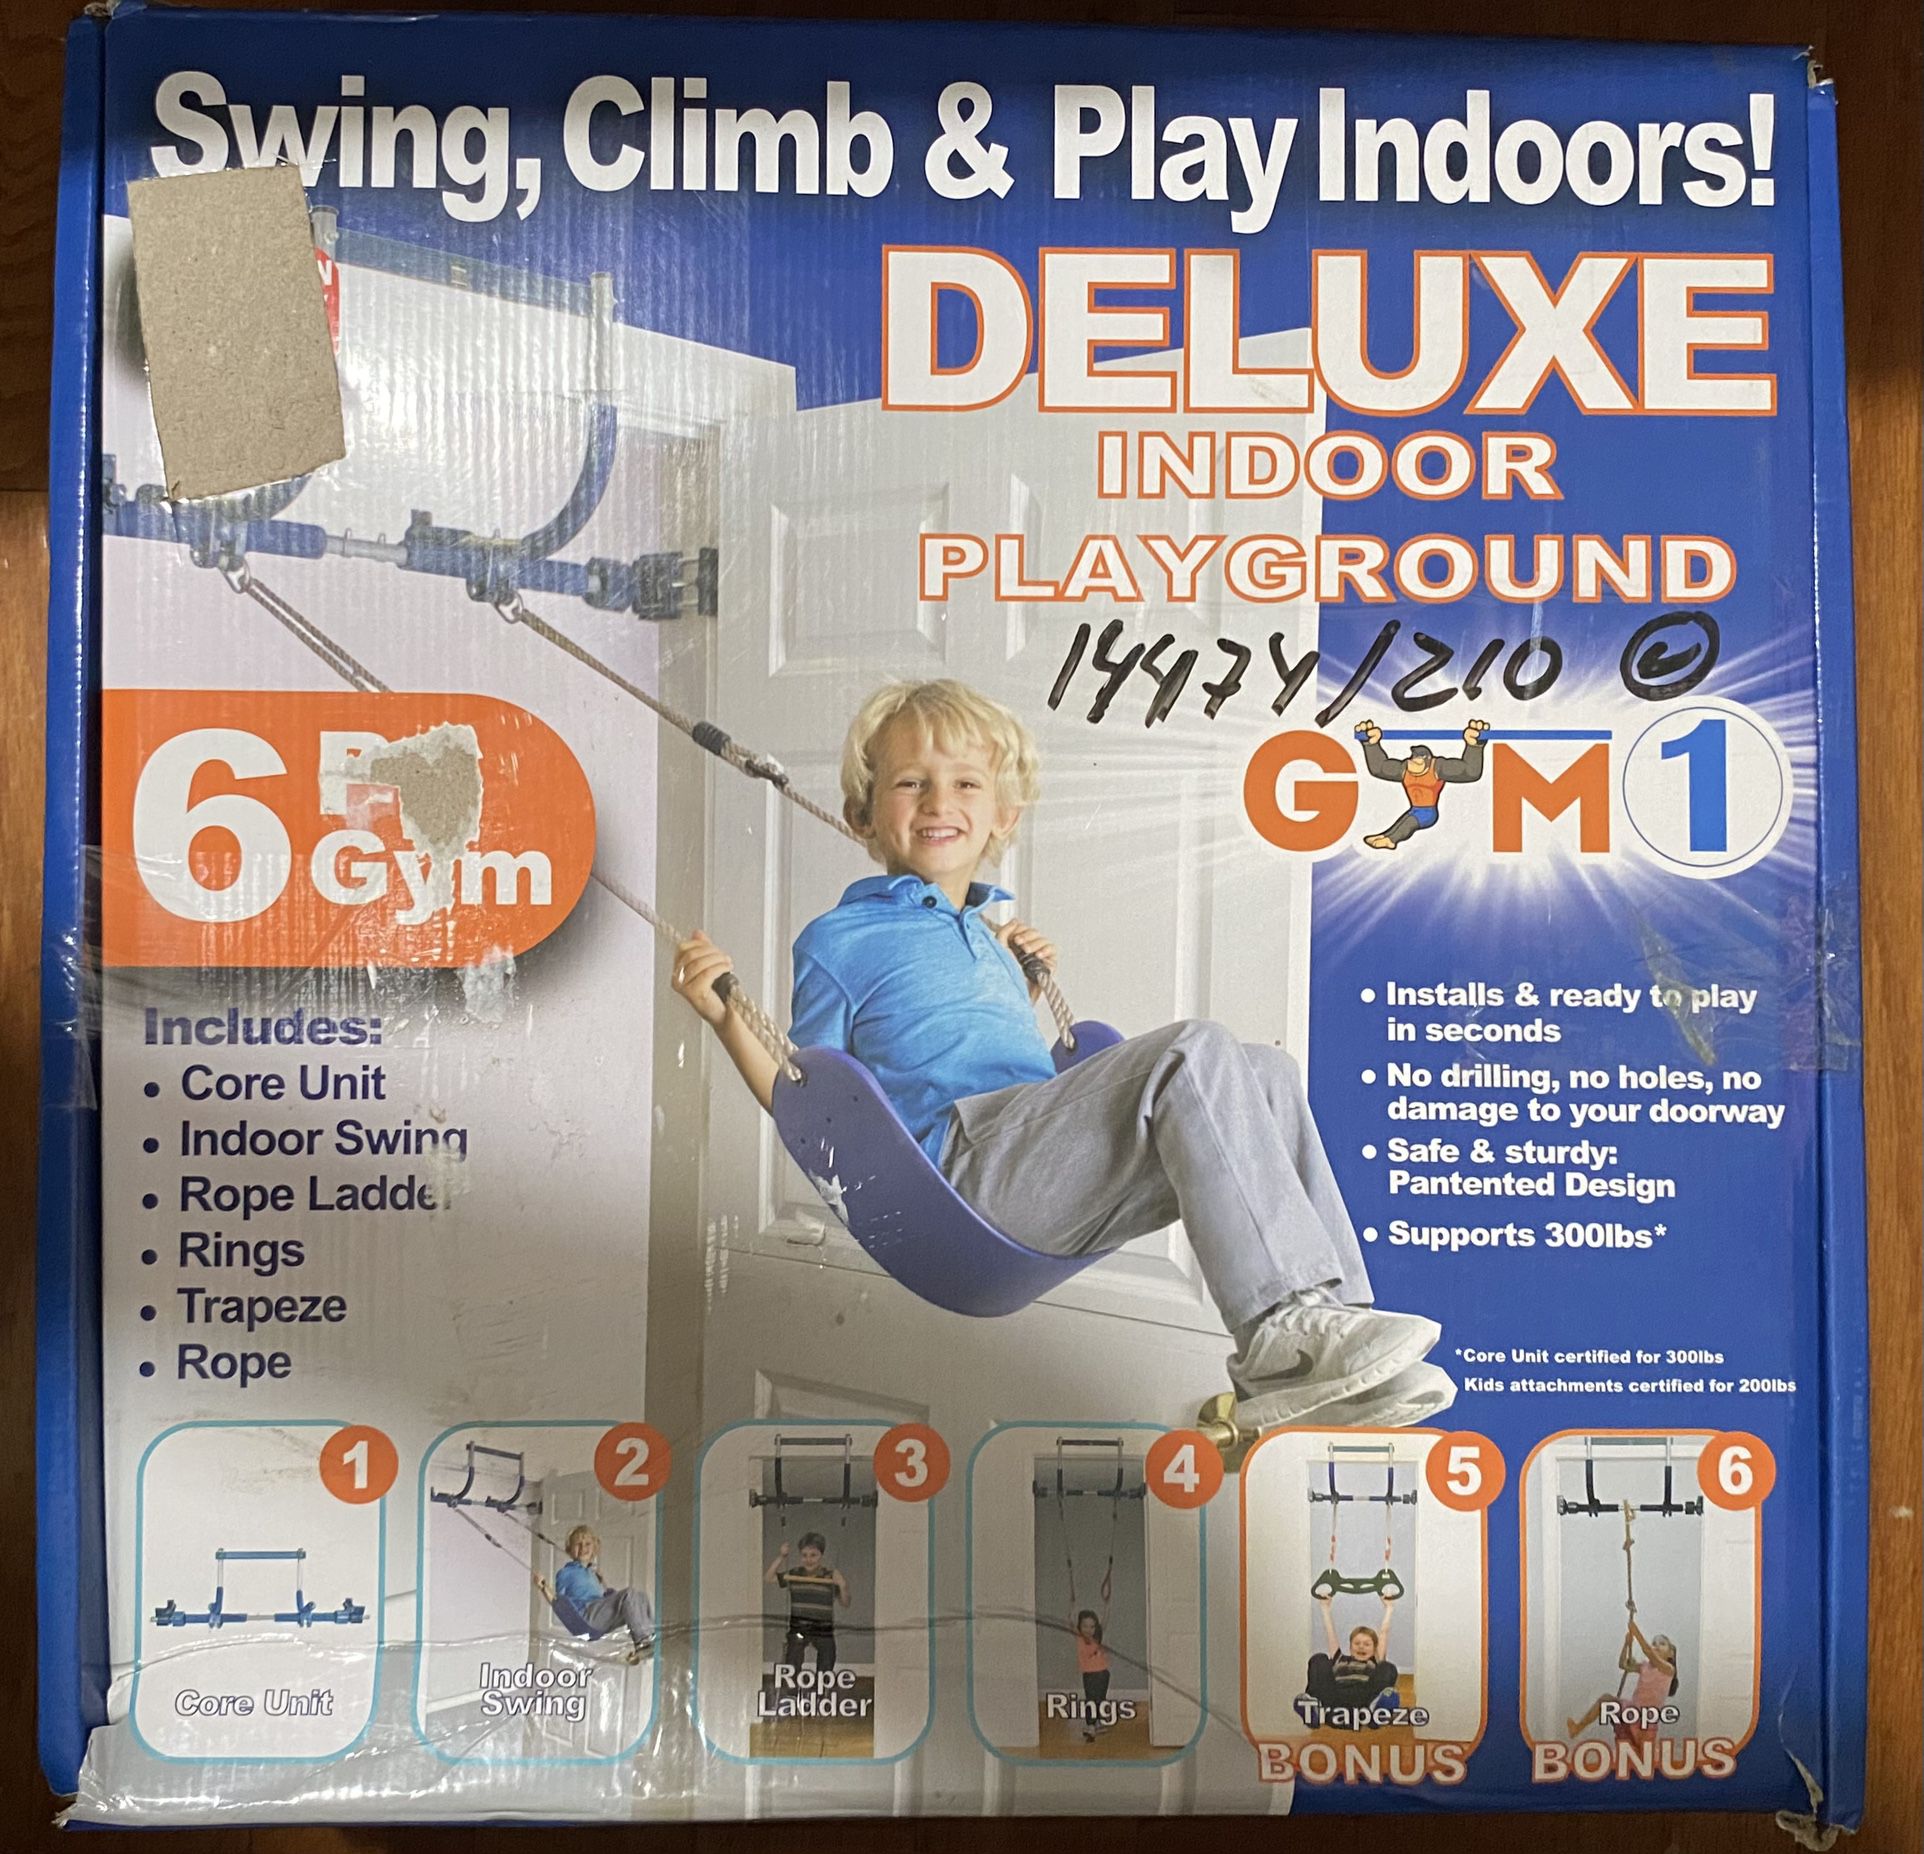 Gym1 - 6 Piece Indoor Doorway Gym Set for Kids - Indoor Swing for Kids Includes Kids Swing Chair, Rings, Hanging Trapeze, Ladder, Swinging Rope & Pull